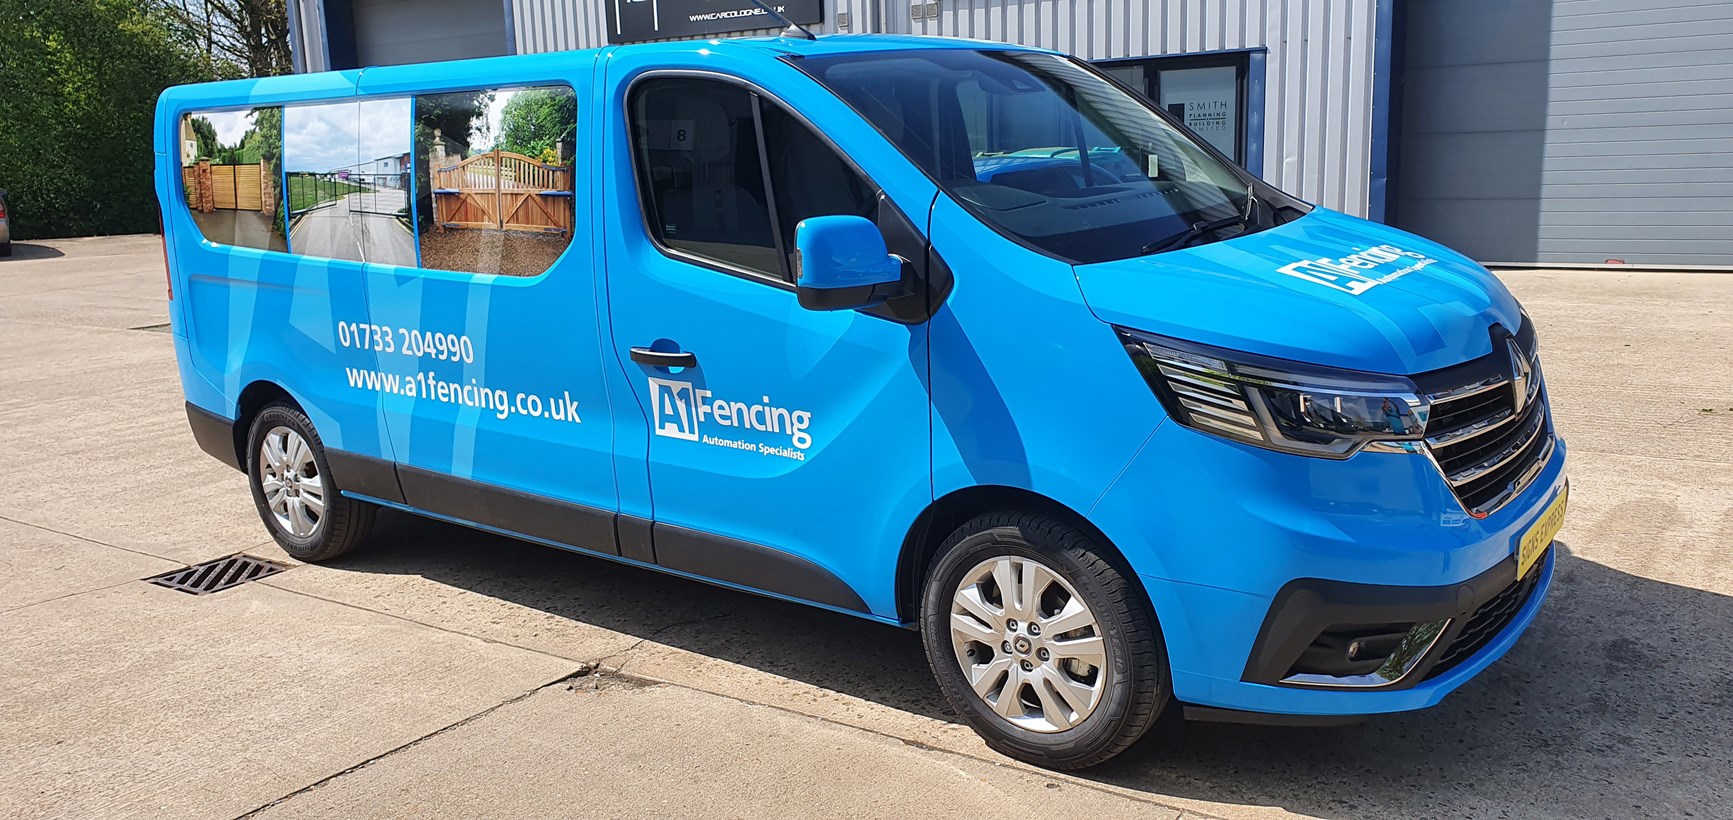 Full wrap for A1 fencing with blue vinyl and prints